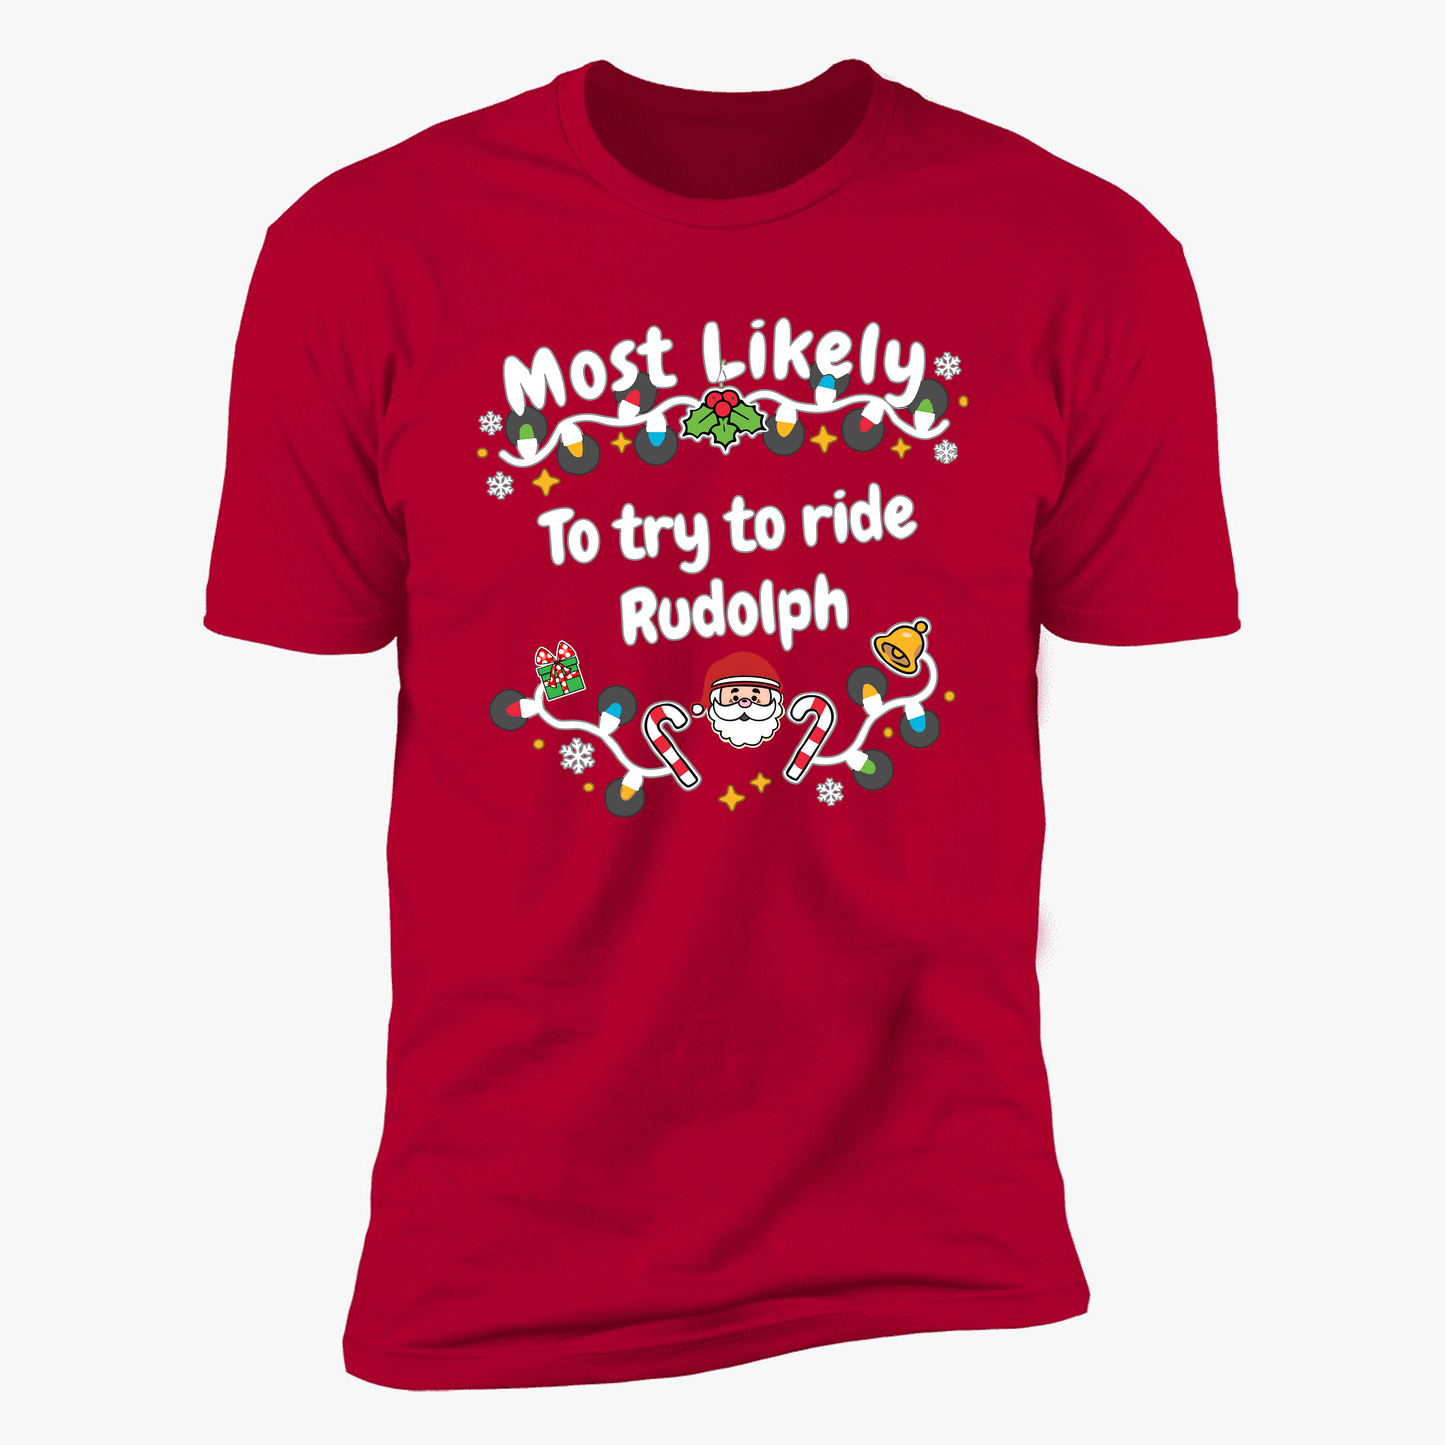 Most Likely To try To Ride Rudolph & Rudolph Deluxe Unisex Tees*